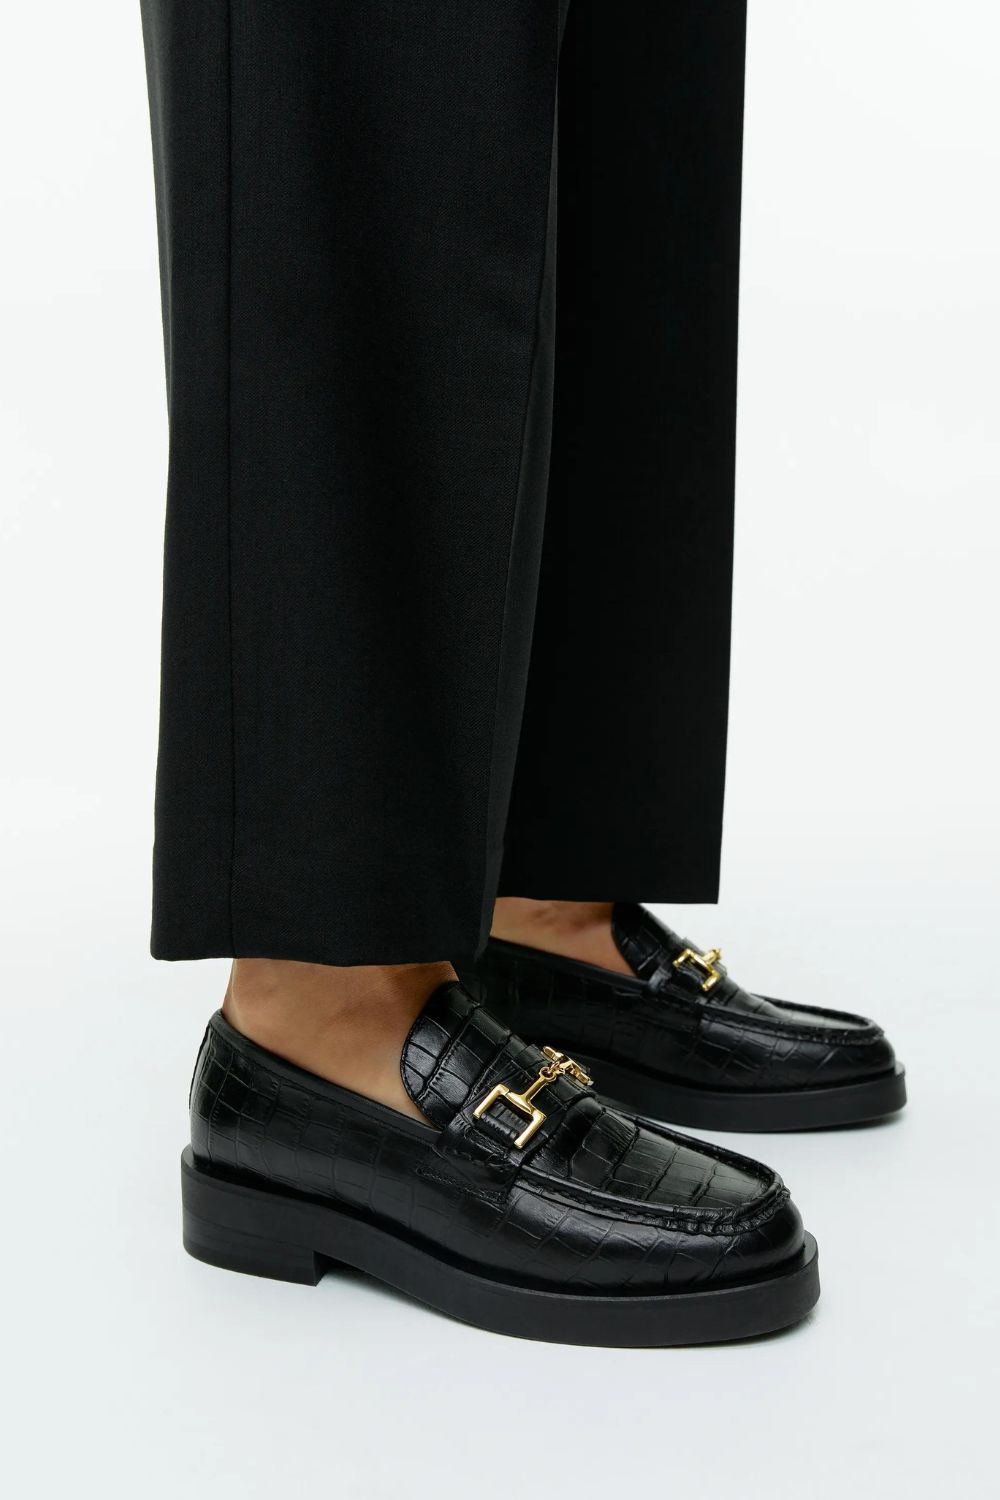 The-Gloss-Magazine-best-loafters-for-women-3